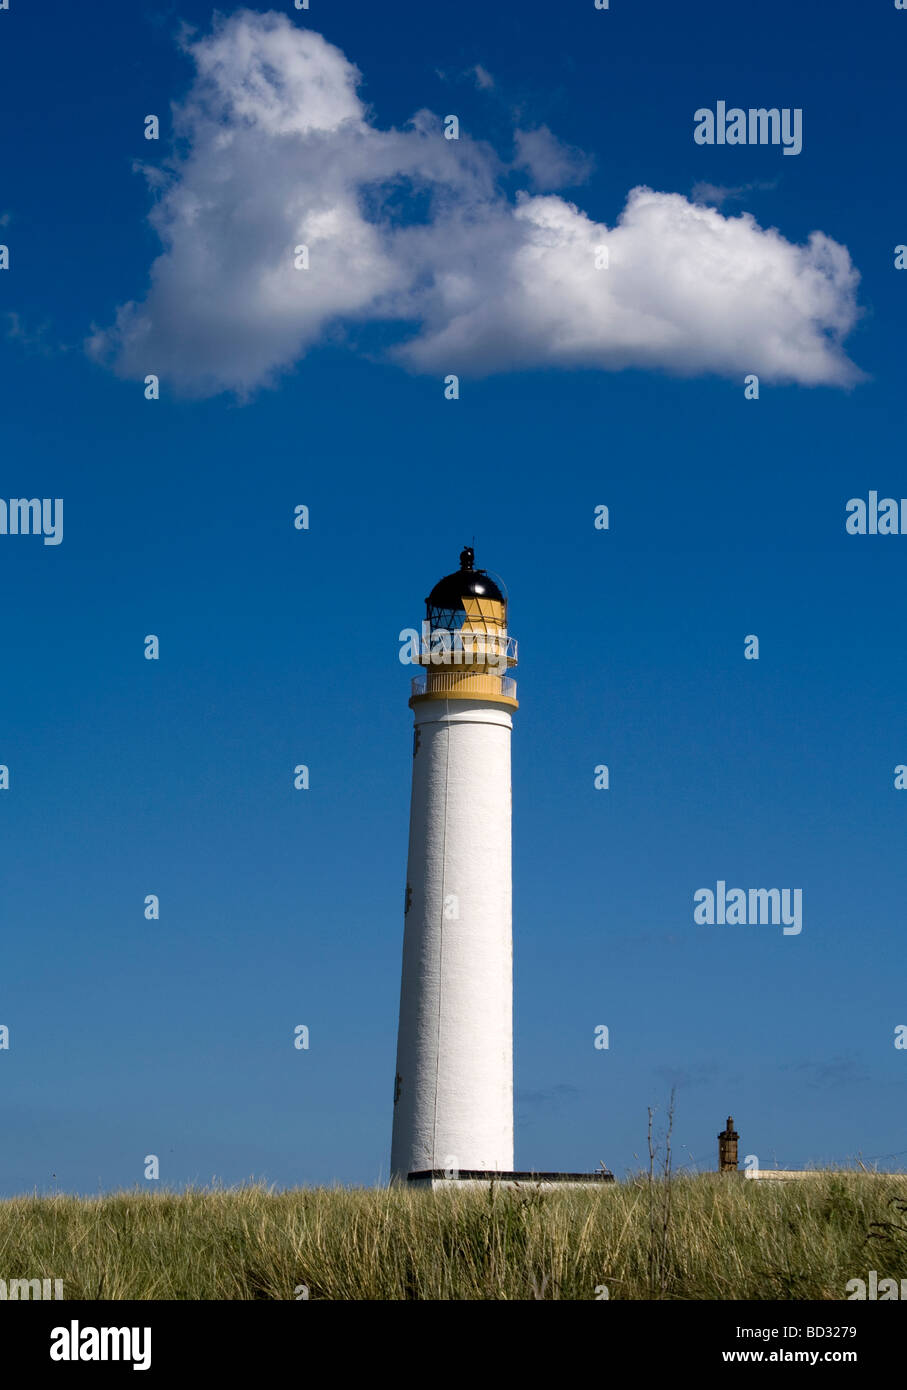 Barns Ness Lighthouse on the Firth of Forth Scotland Stock Photo